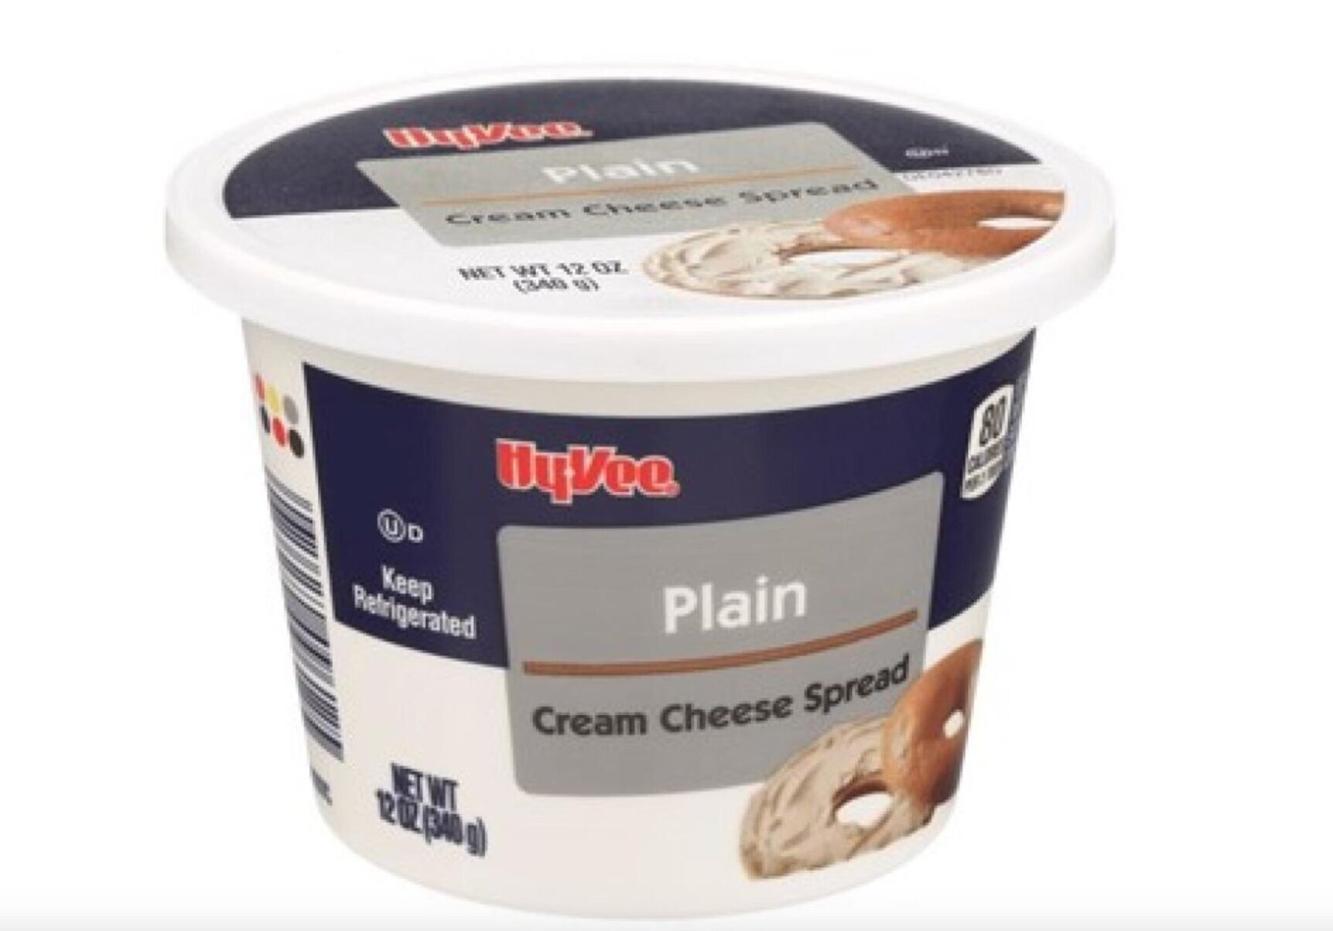 Cream Cheese From Aldi, HyVee Stores Recalled Due to Salmonella Risk